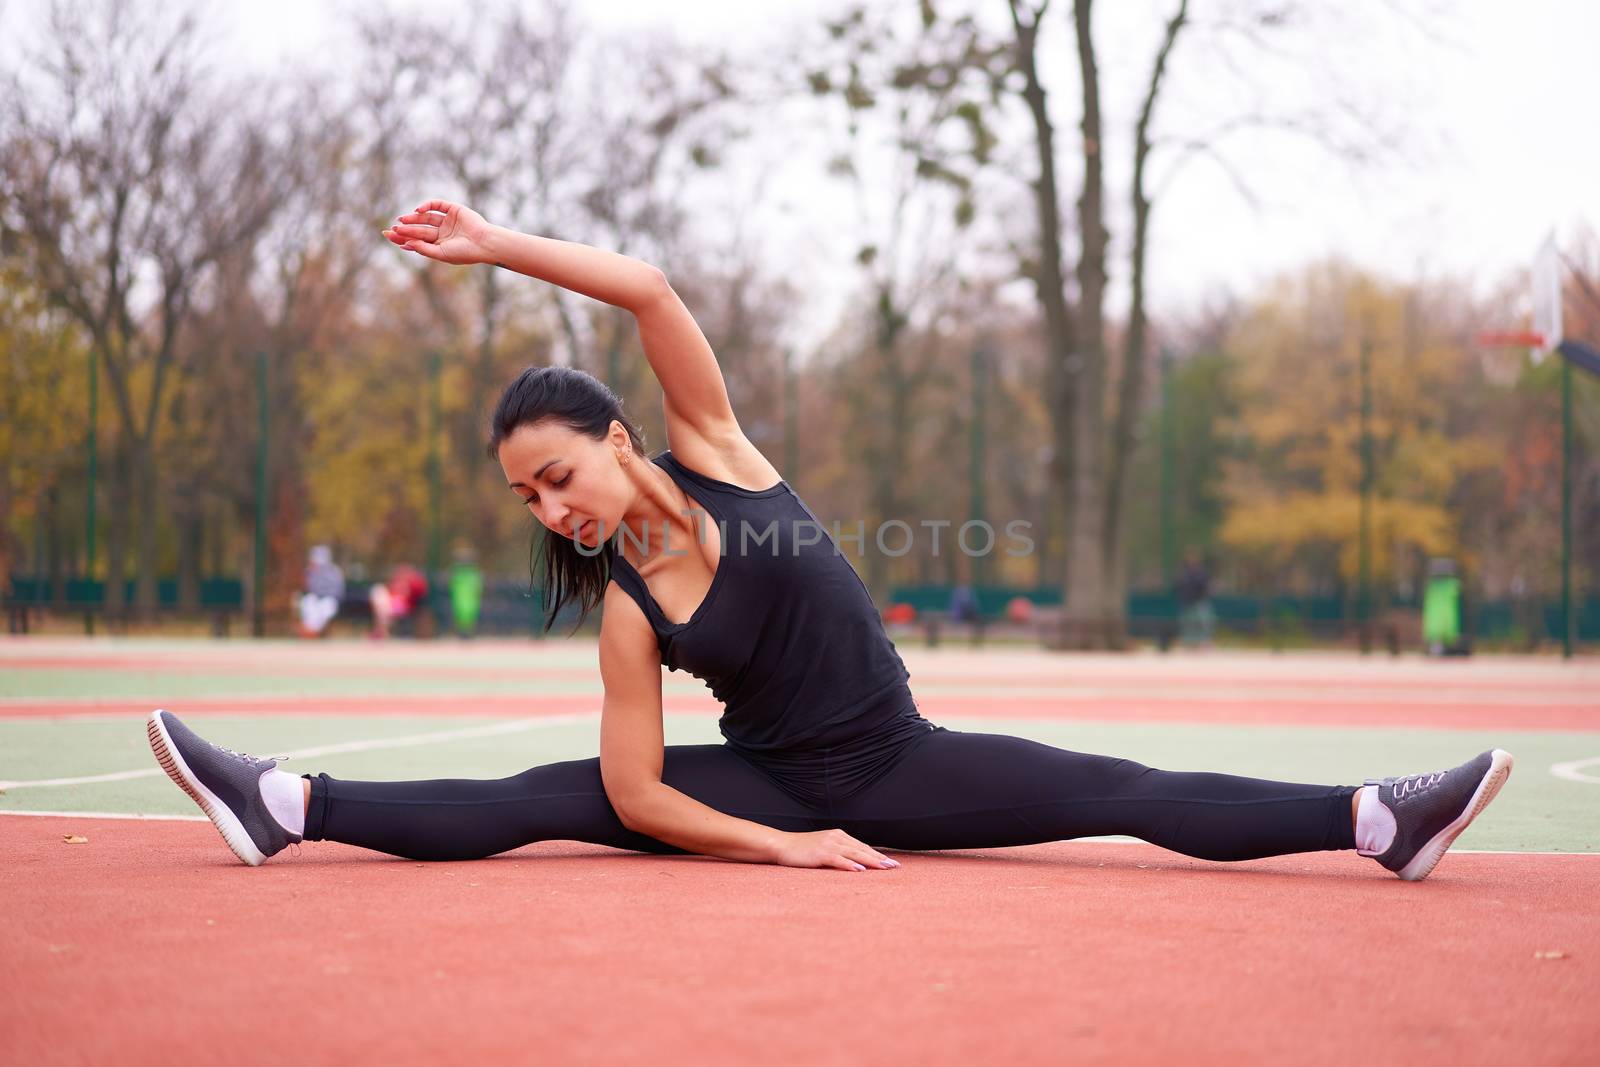 Happy girl doing fitness exercises outdoor on playground. Healthy lifestyle. Morning workout positive emotion smiling sportive people. one female training stretching